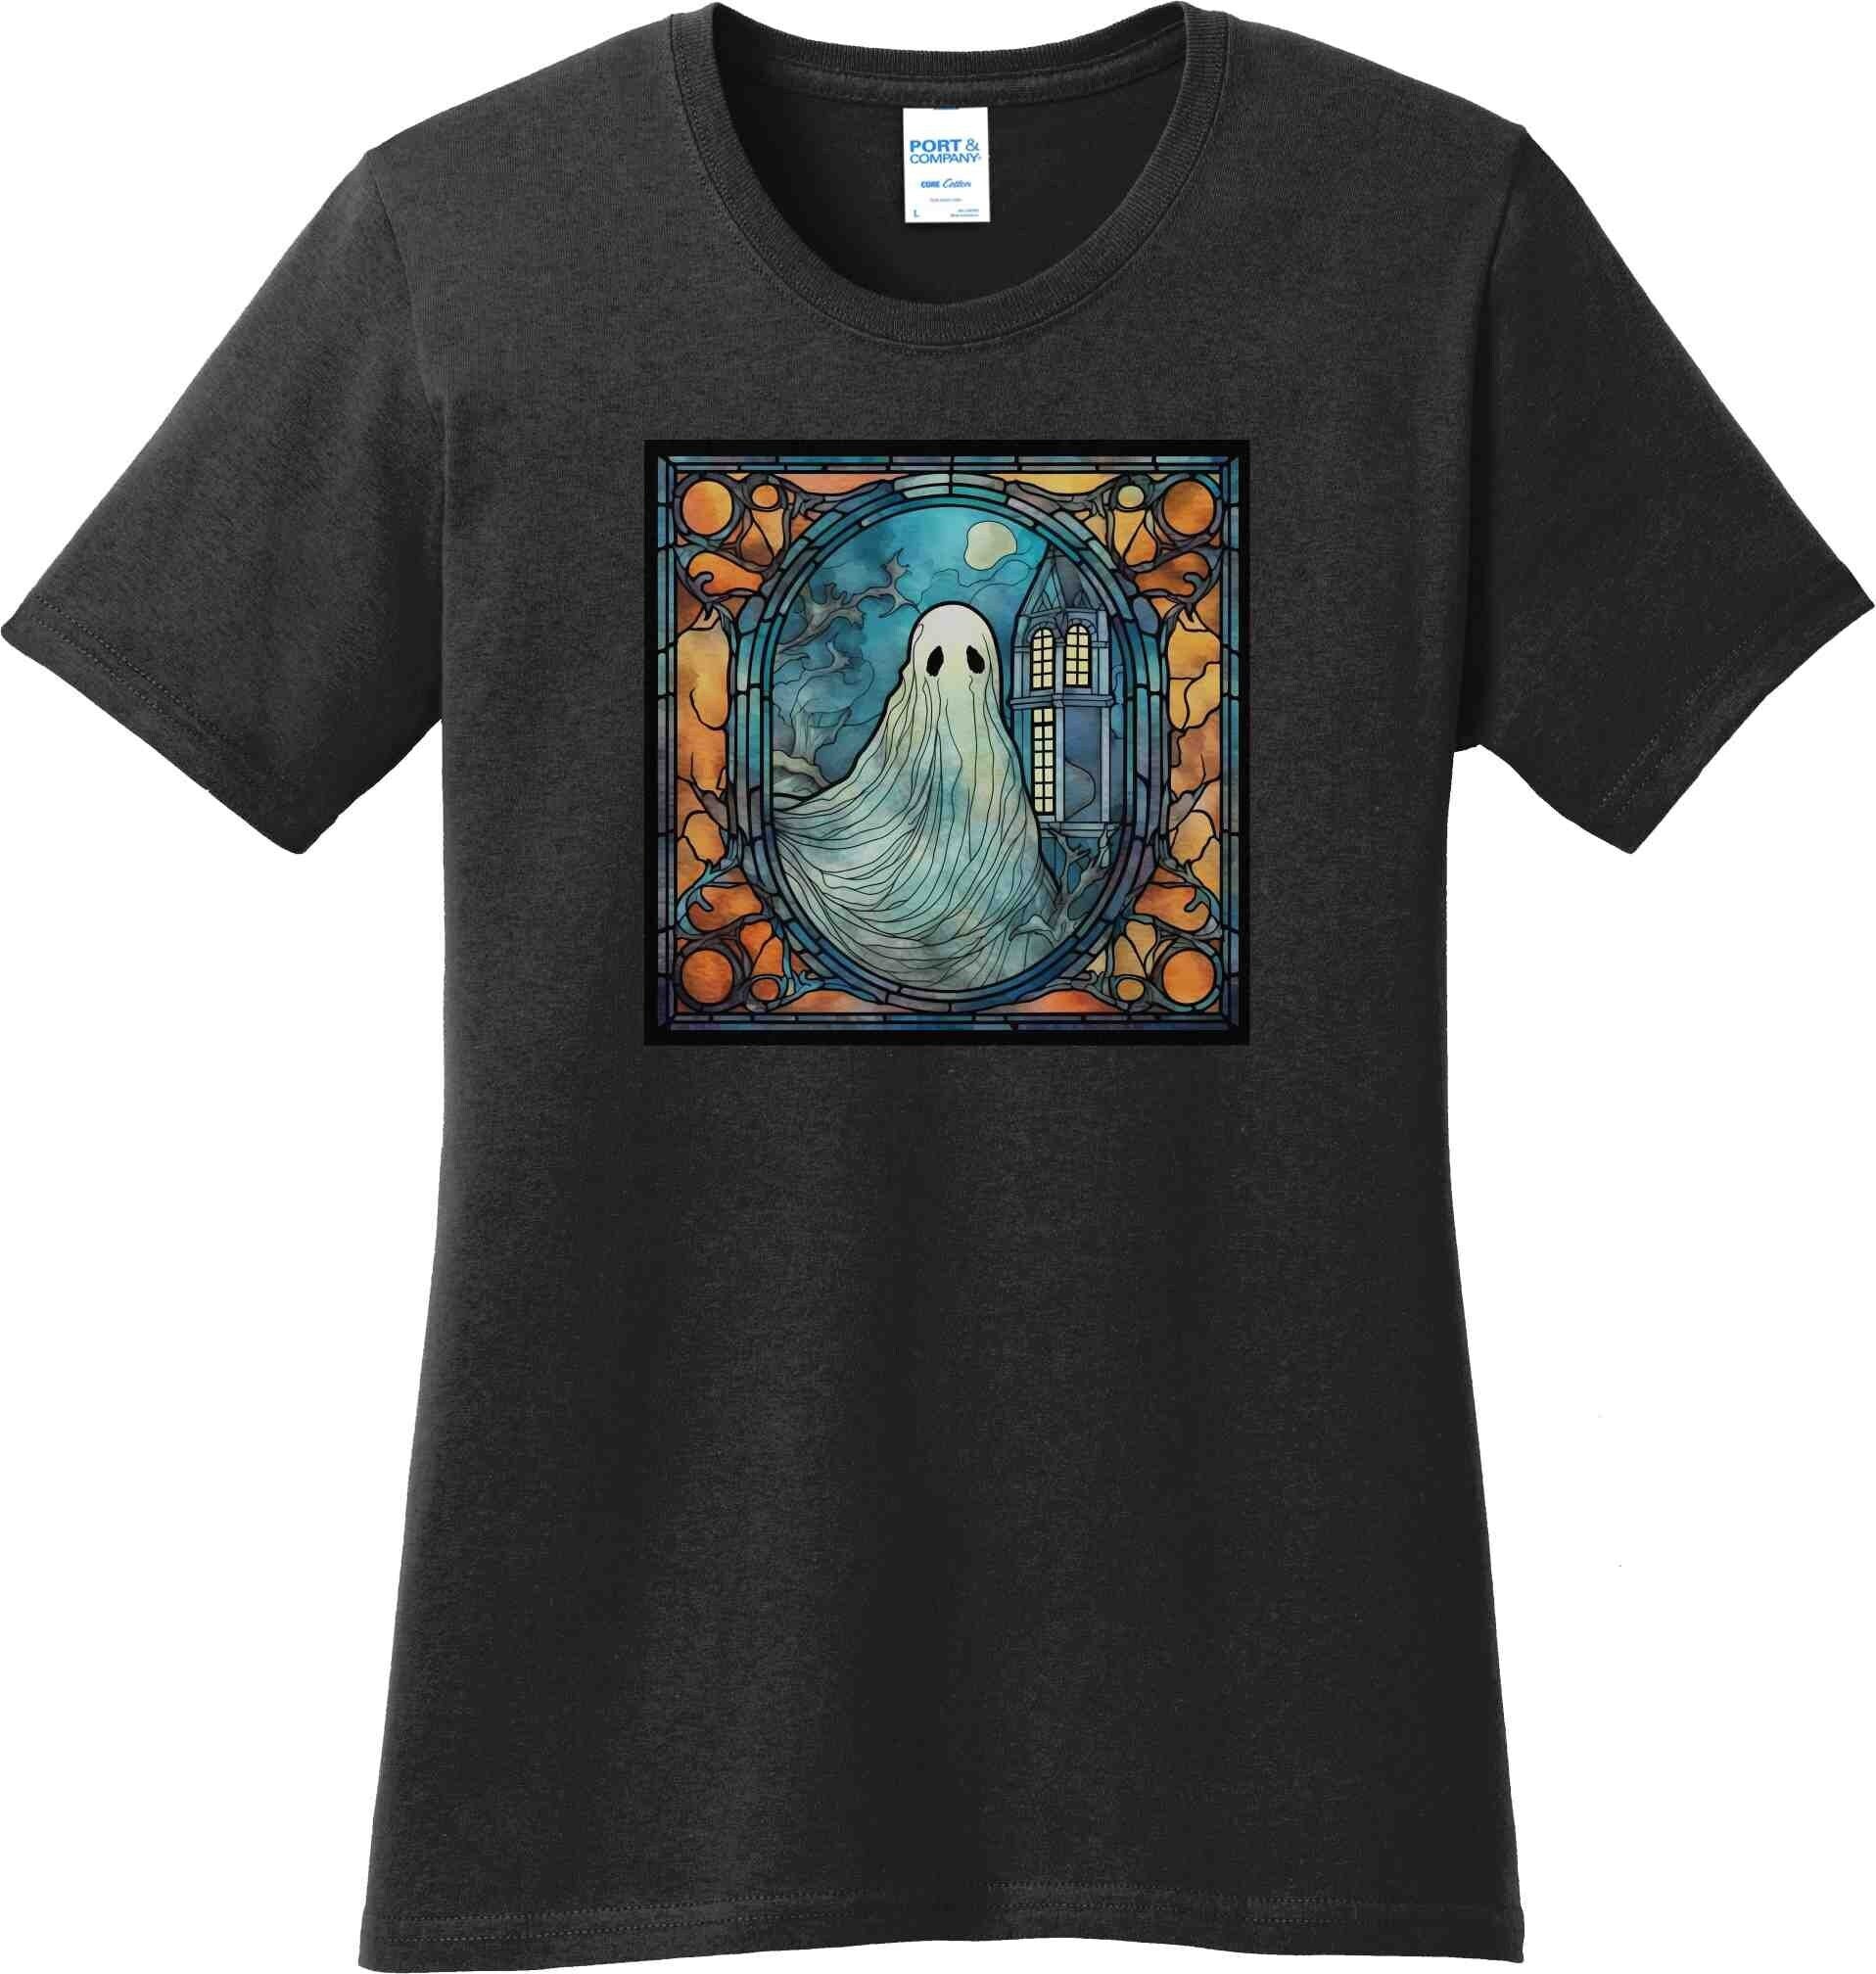 Halloween Stained Glass Ghost and Haunted House Ladies Tee, tshirt, t-shirt, halloween woman's shirt, teacher gift, halloween party apparel - SBS T Shop